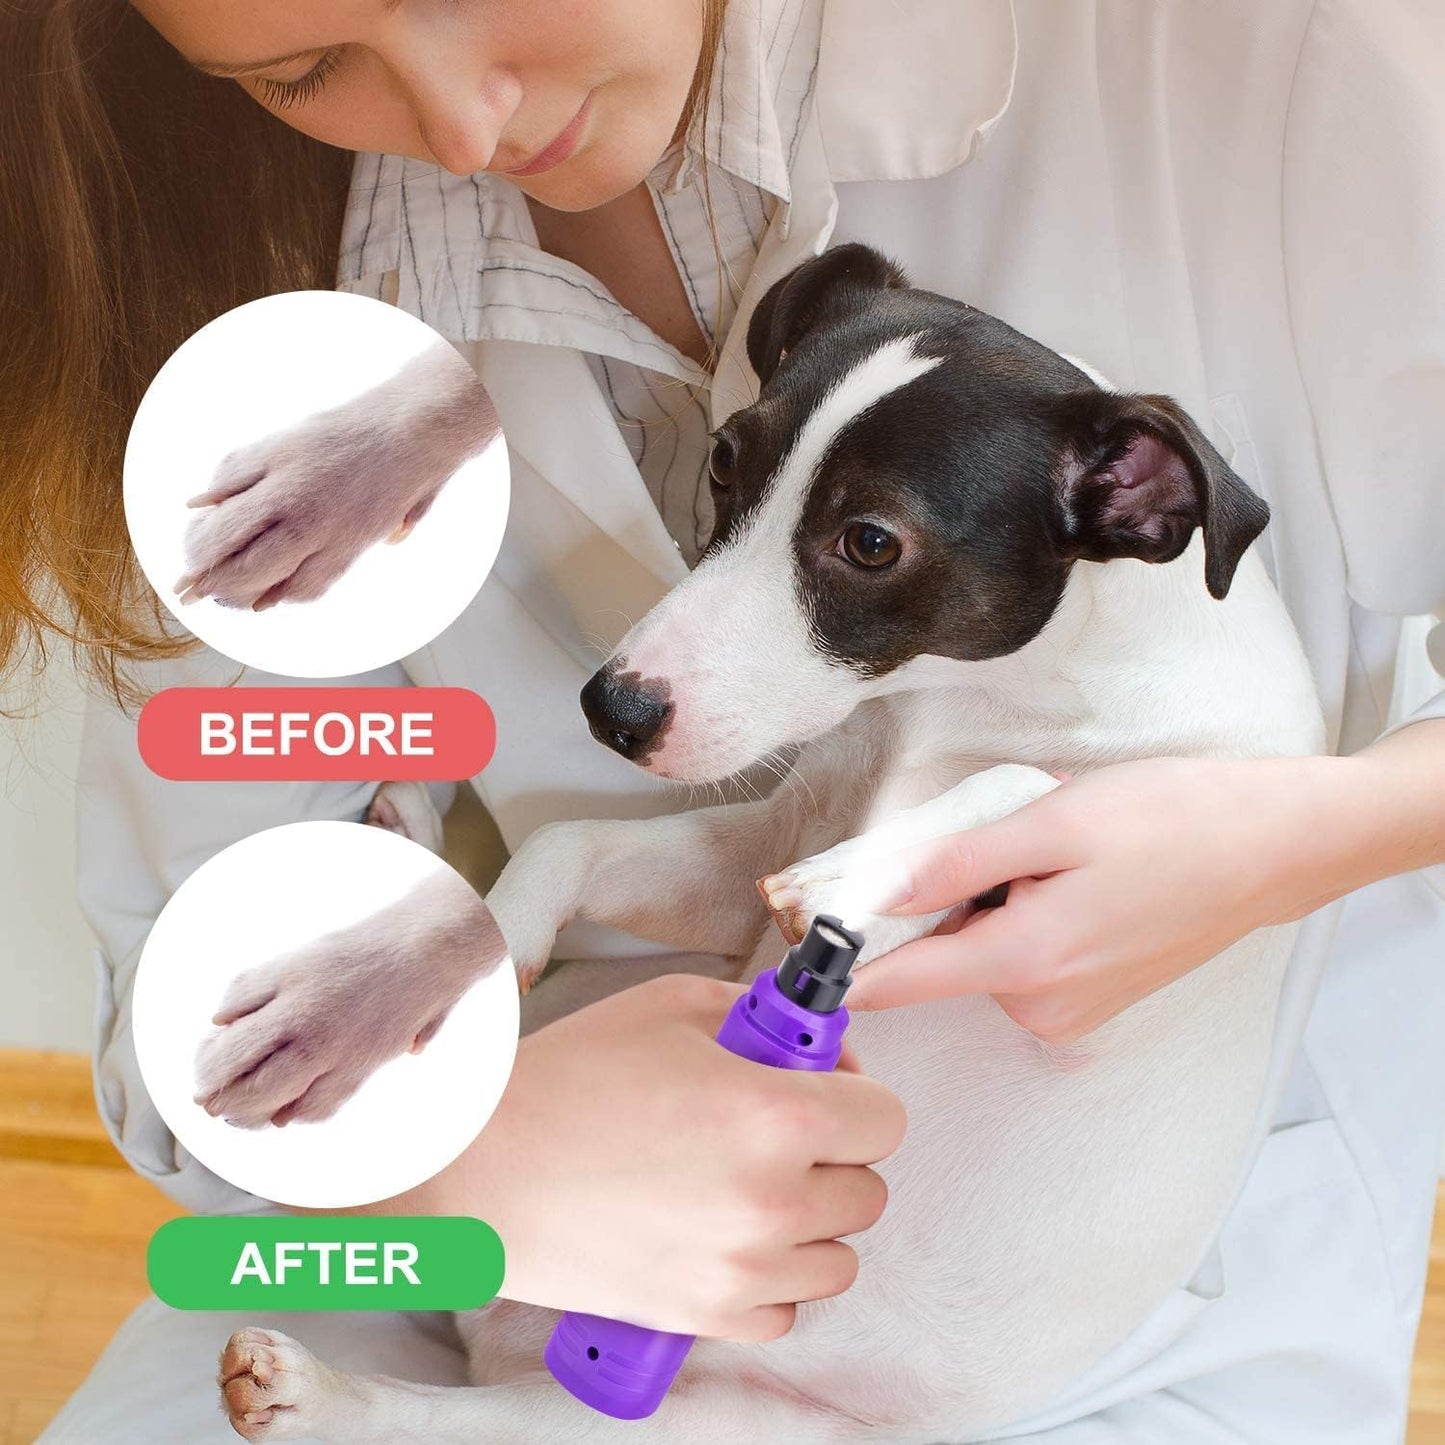 Dog Nail Grinder with LED Light - Upgraded 2-Speed Electric Pet Nail Trimmer Powerful Painless Paws Grooming & Smoothing for Small Medium Large Dogs & Cats (Purple)